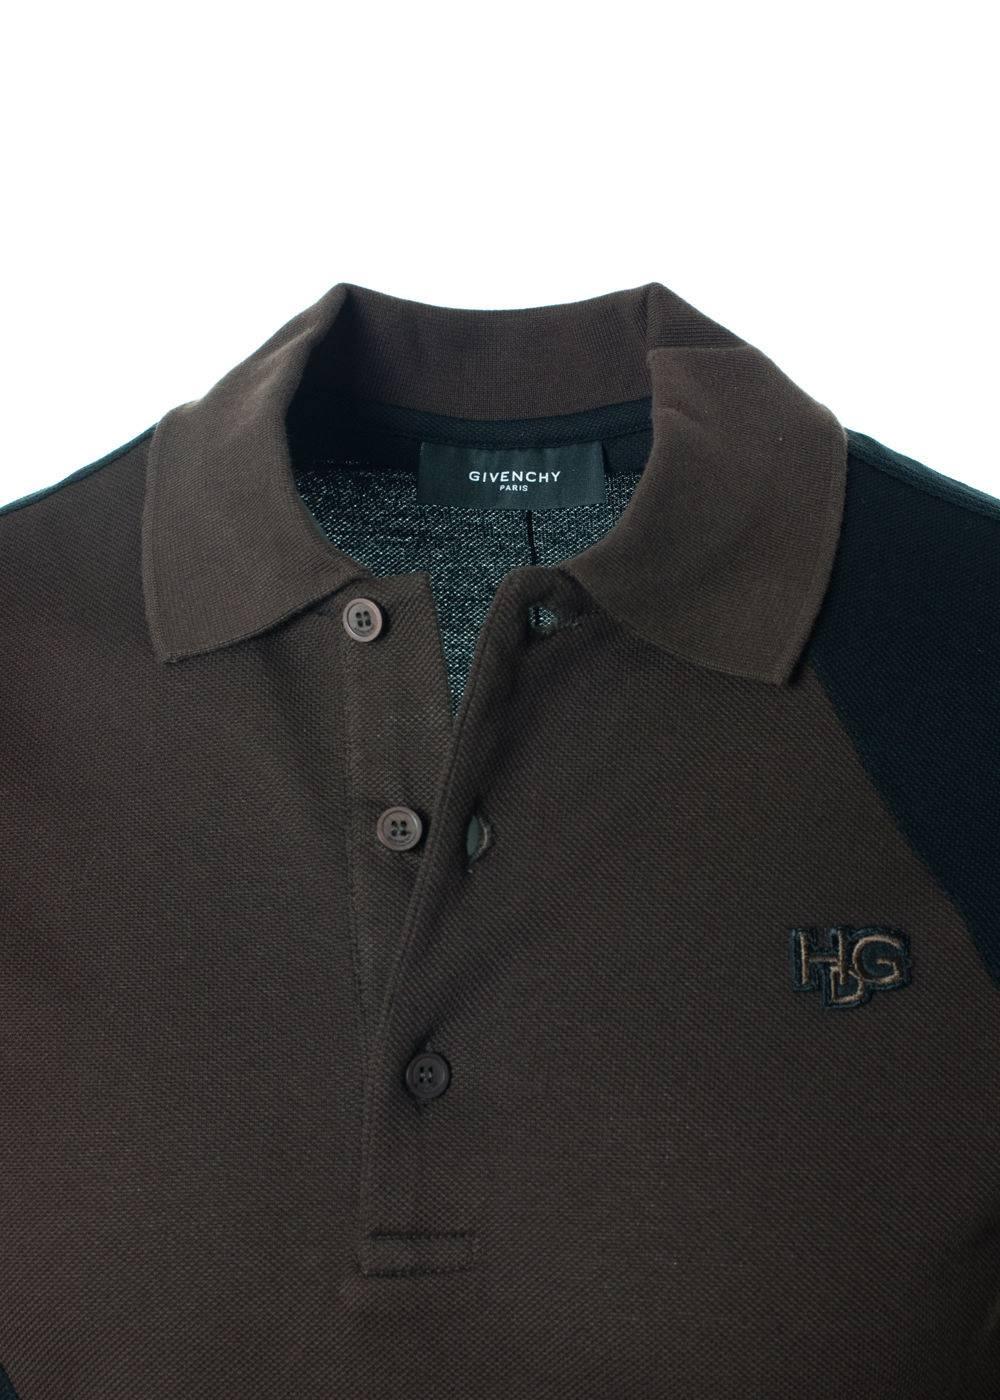 Givenchy Men's Black Brown 100% Cotton Short Sleeve Polo Shirt  In New Condition For Sale In Brooklyn, NY